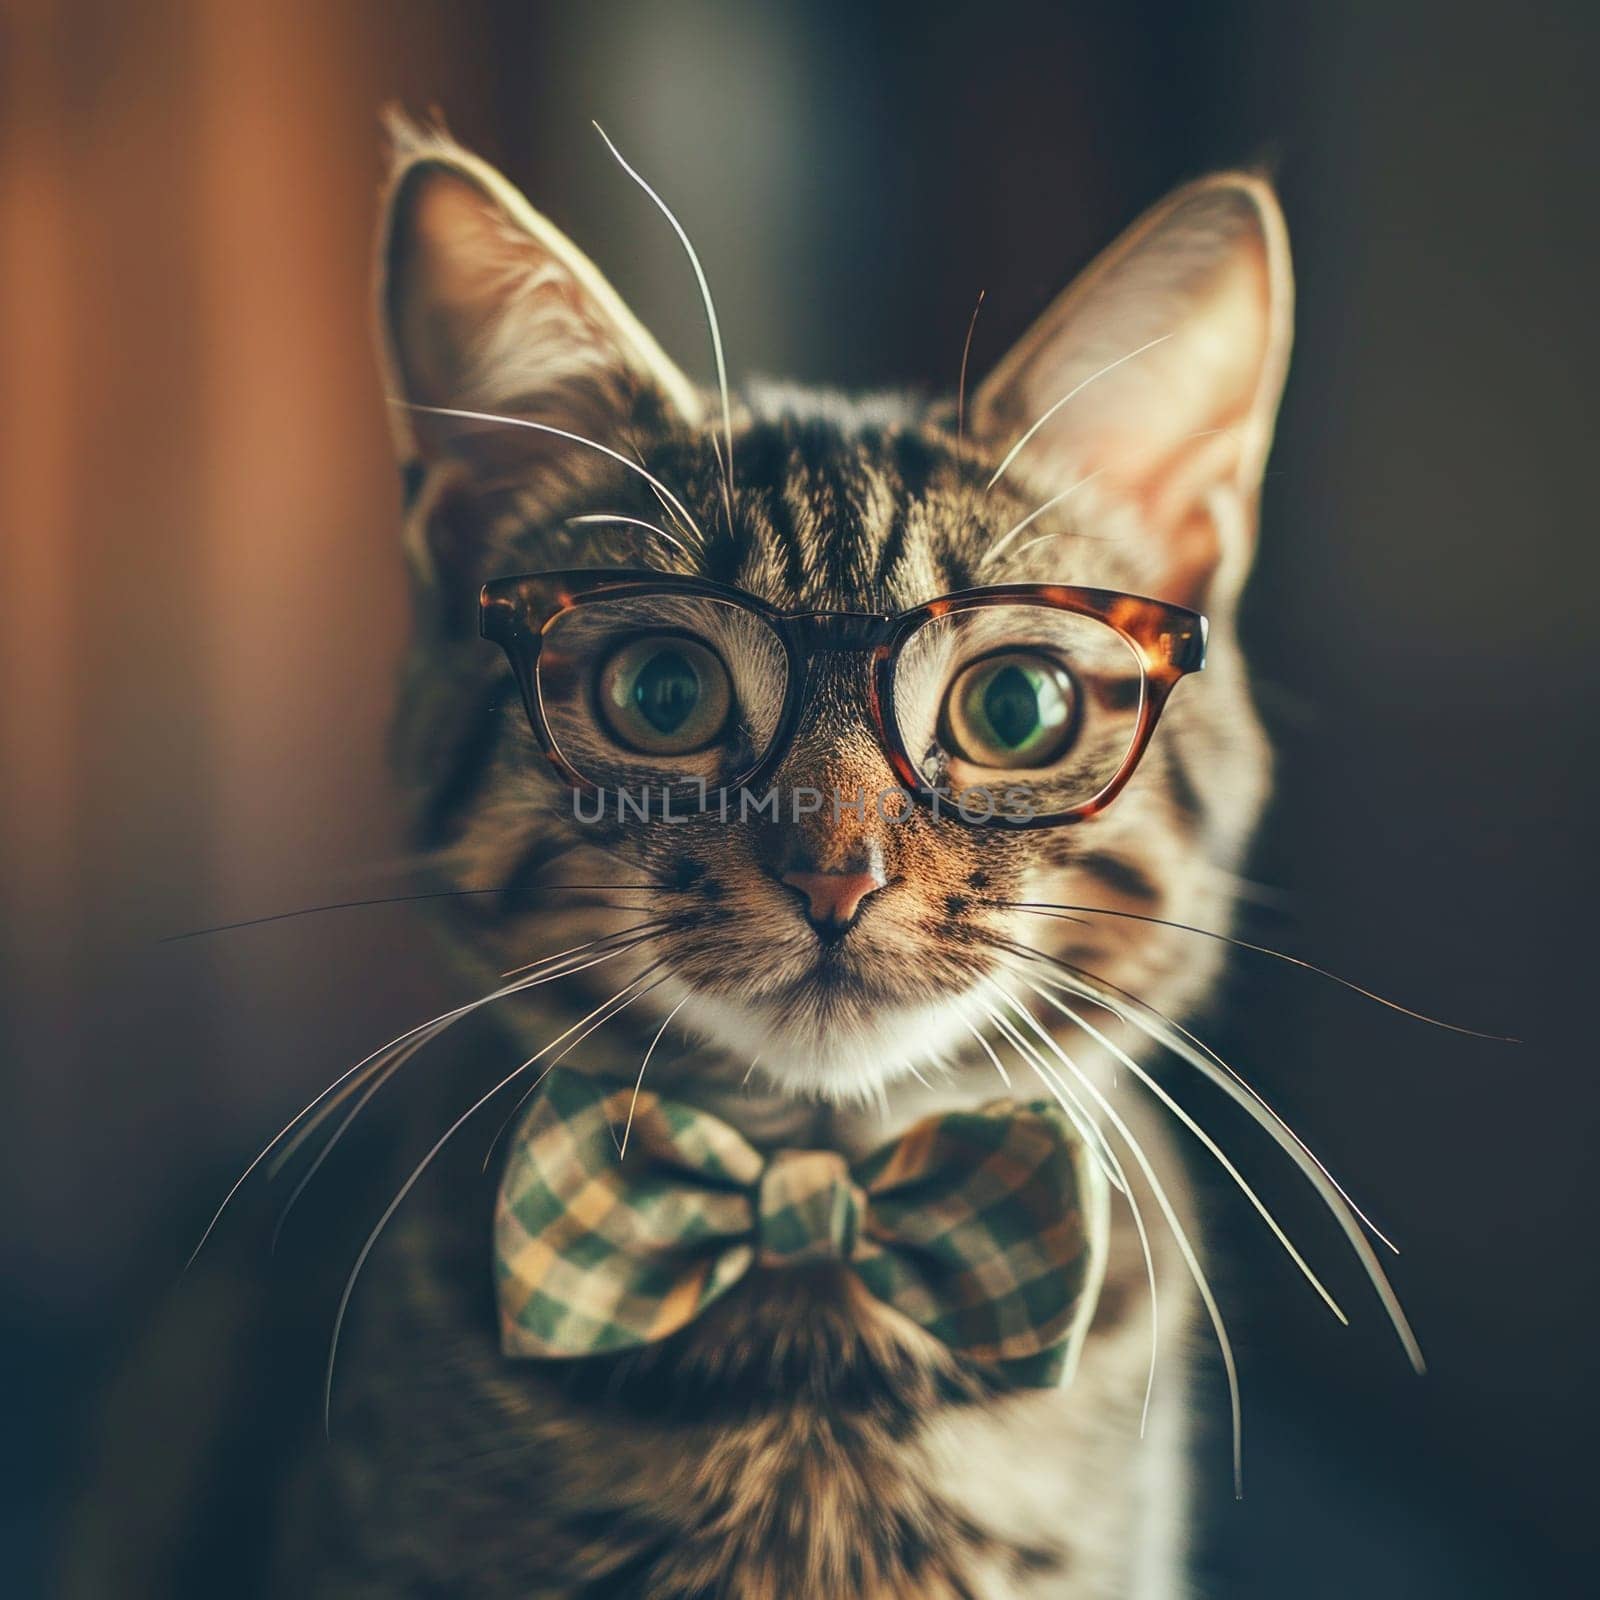 A close up of a cat wearing glasses and a bow tie